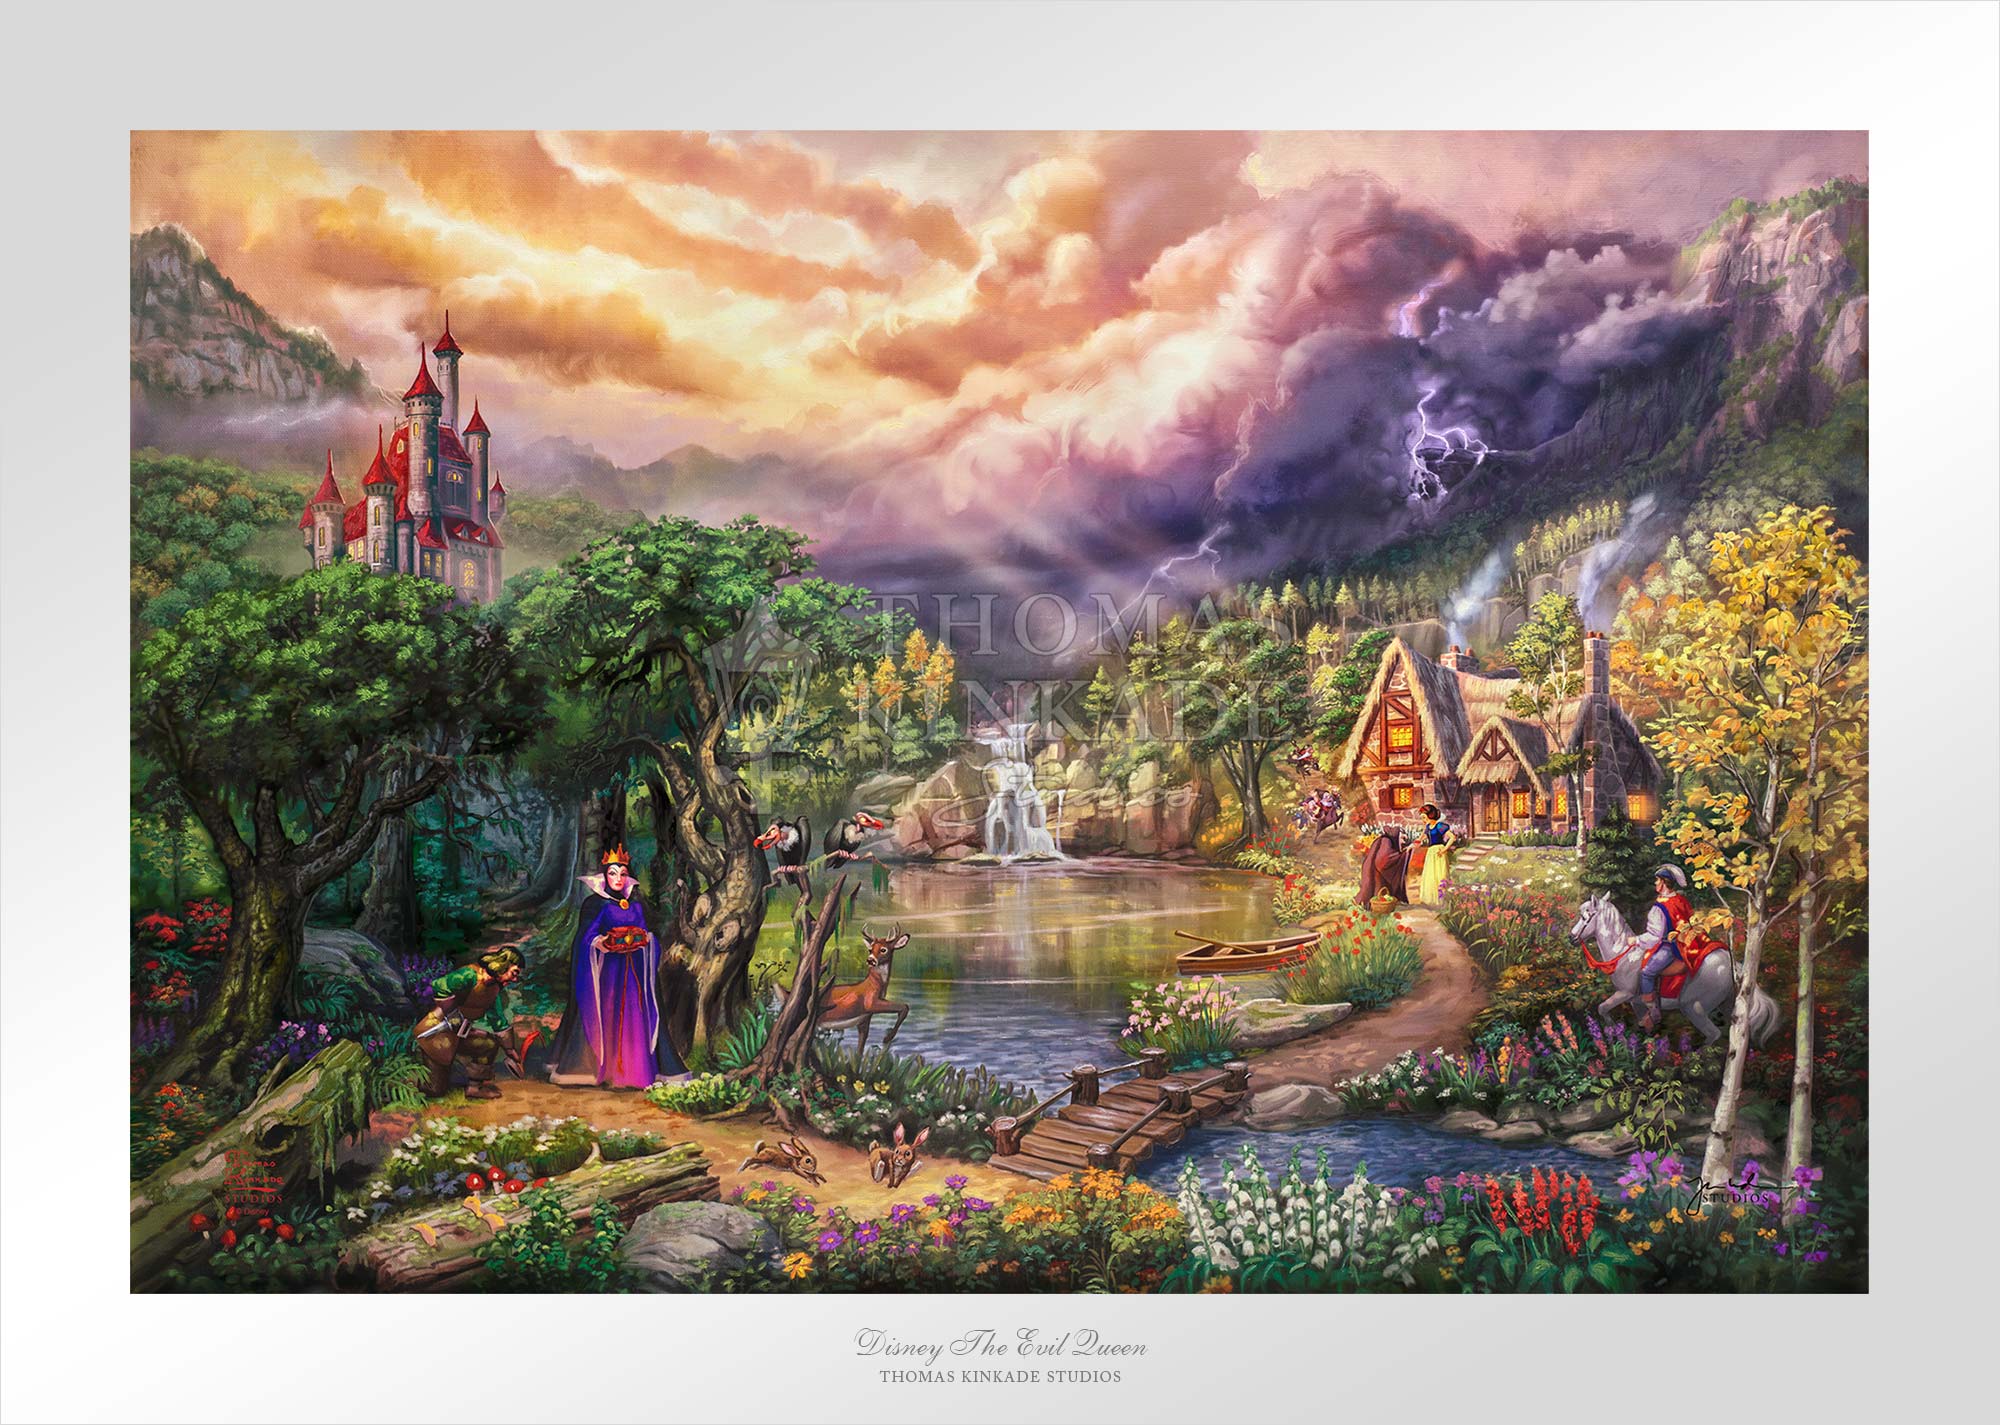 The old hag (Evil Queen) finds Snow White in front of the Seven Dwarfs' cottage and offers her the poisoned red apple. Unframed